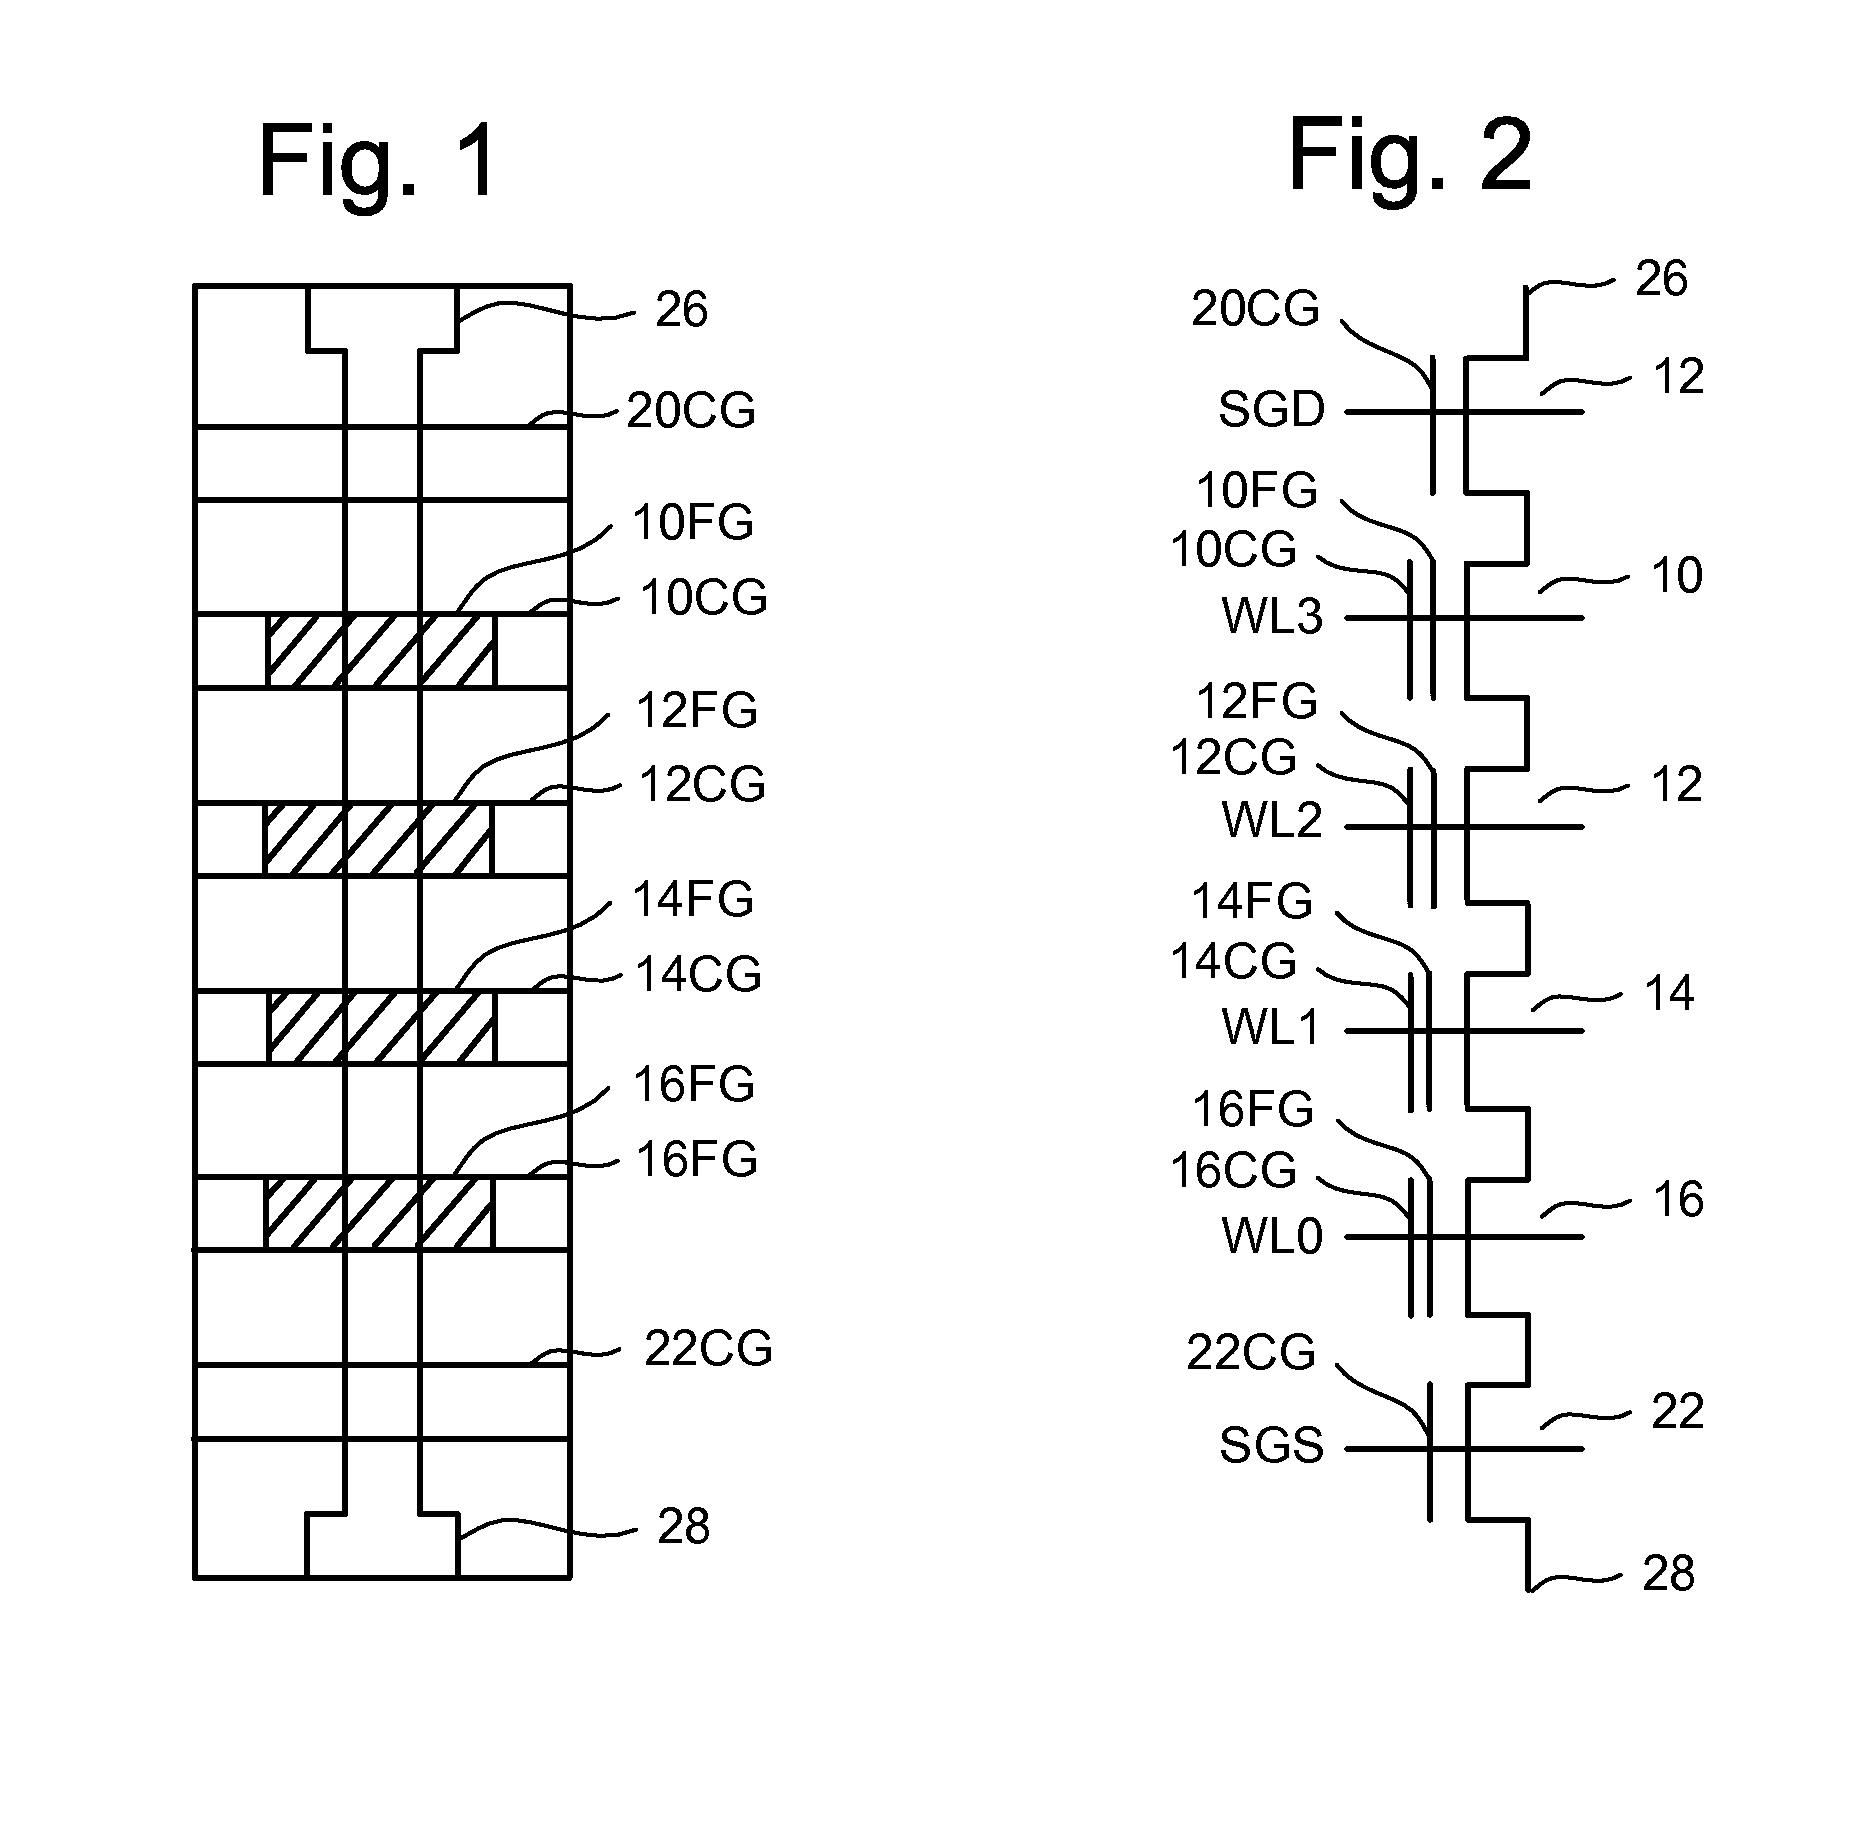 Systems for margined neighbor reading for non-volatile memory read operations including coupling compensation